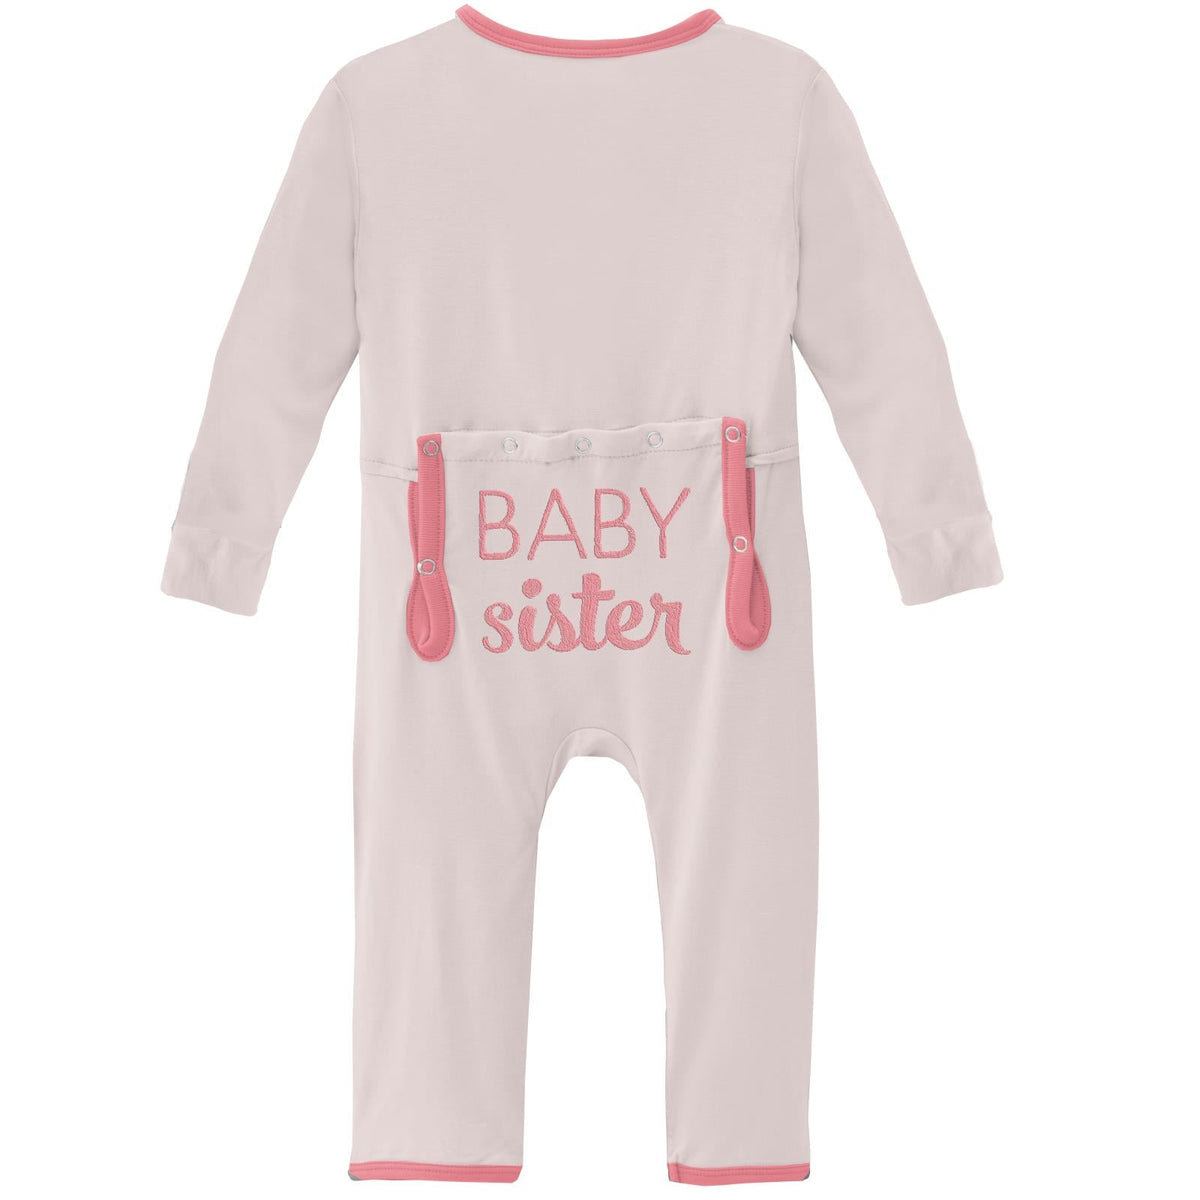 Applique Coverall with Zipper in Macaroon - Baby Sister